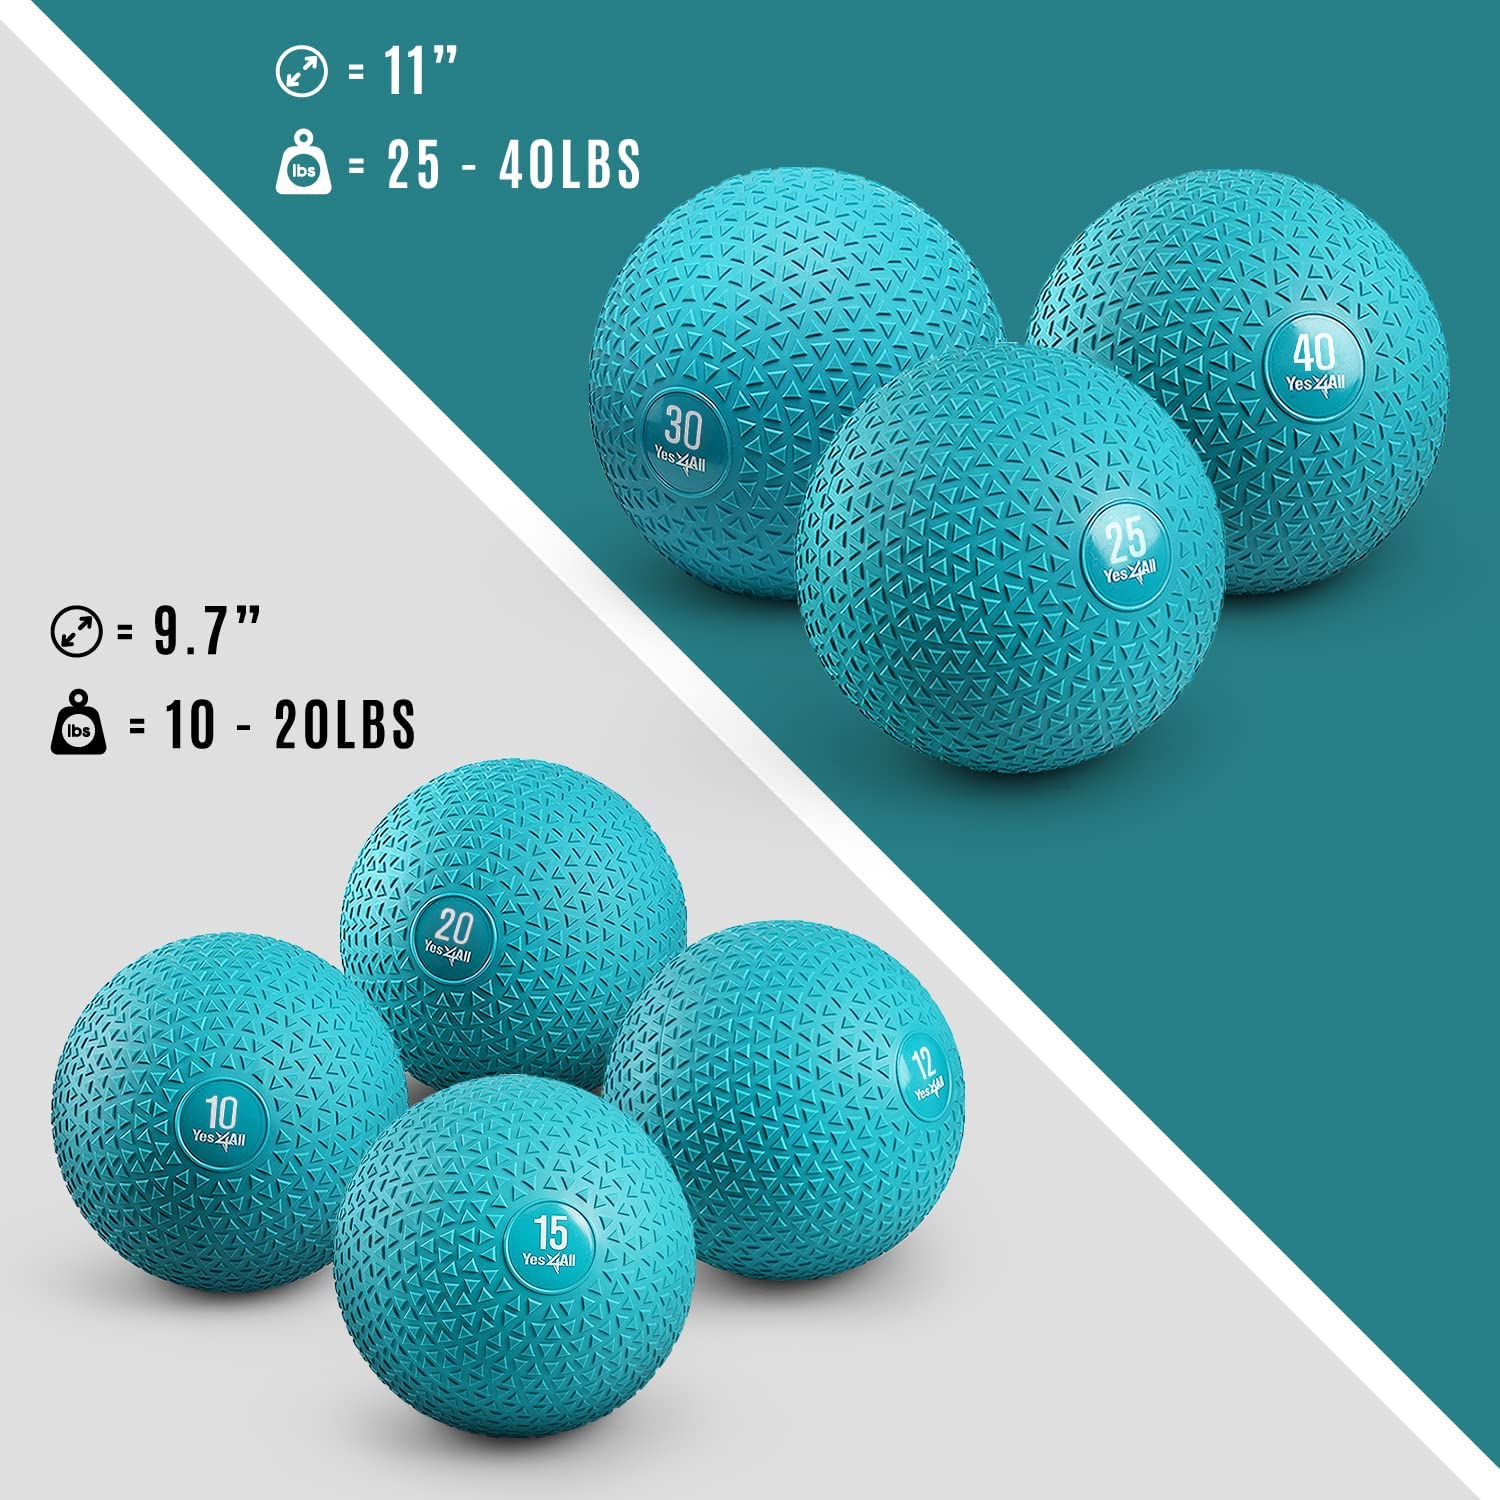 Yes4All 25lbs Slam Medicine Ball Triangle Teal - image 5 of 8